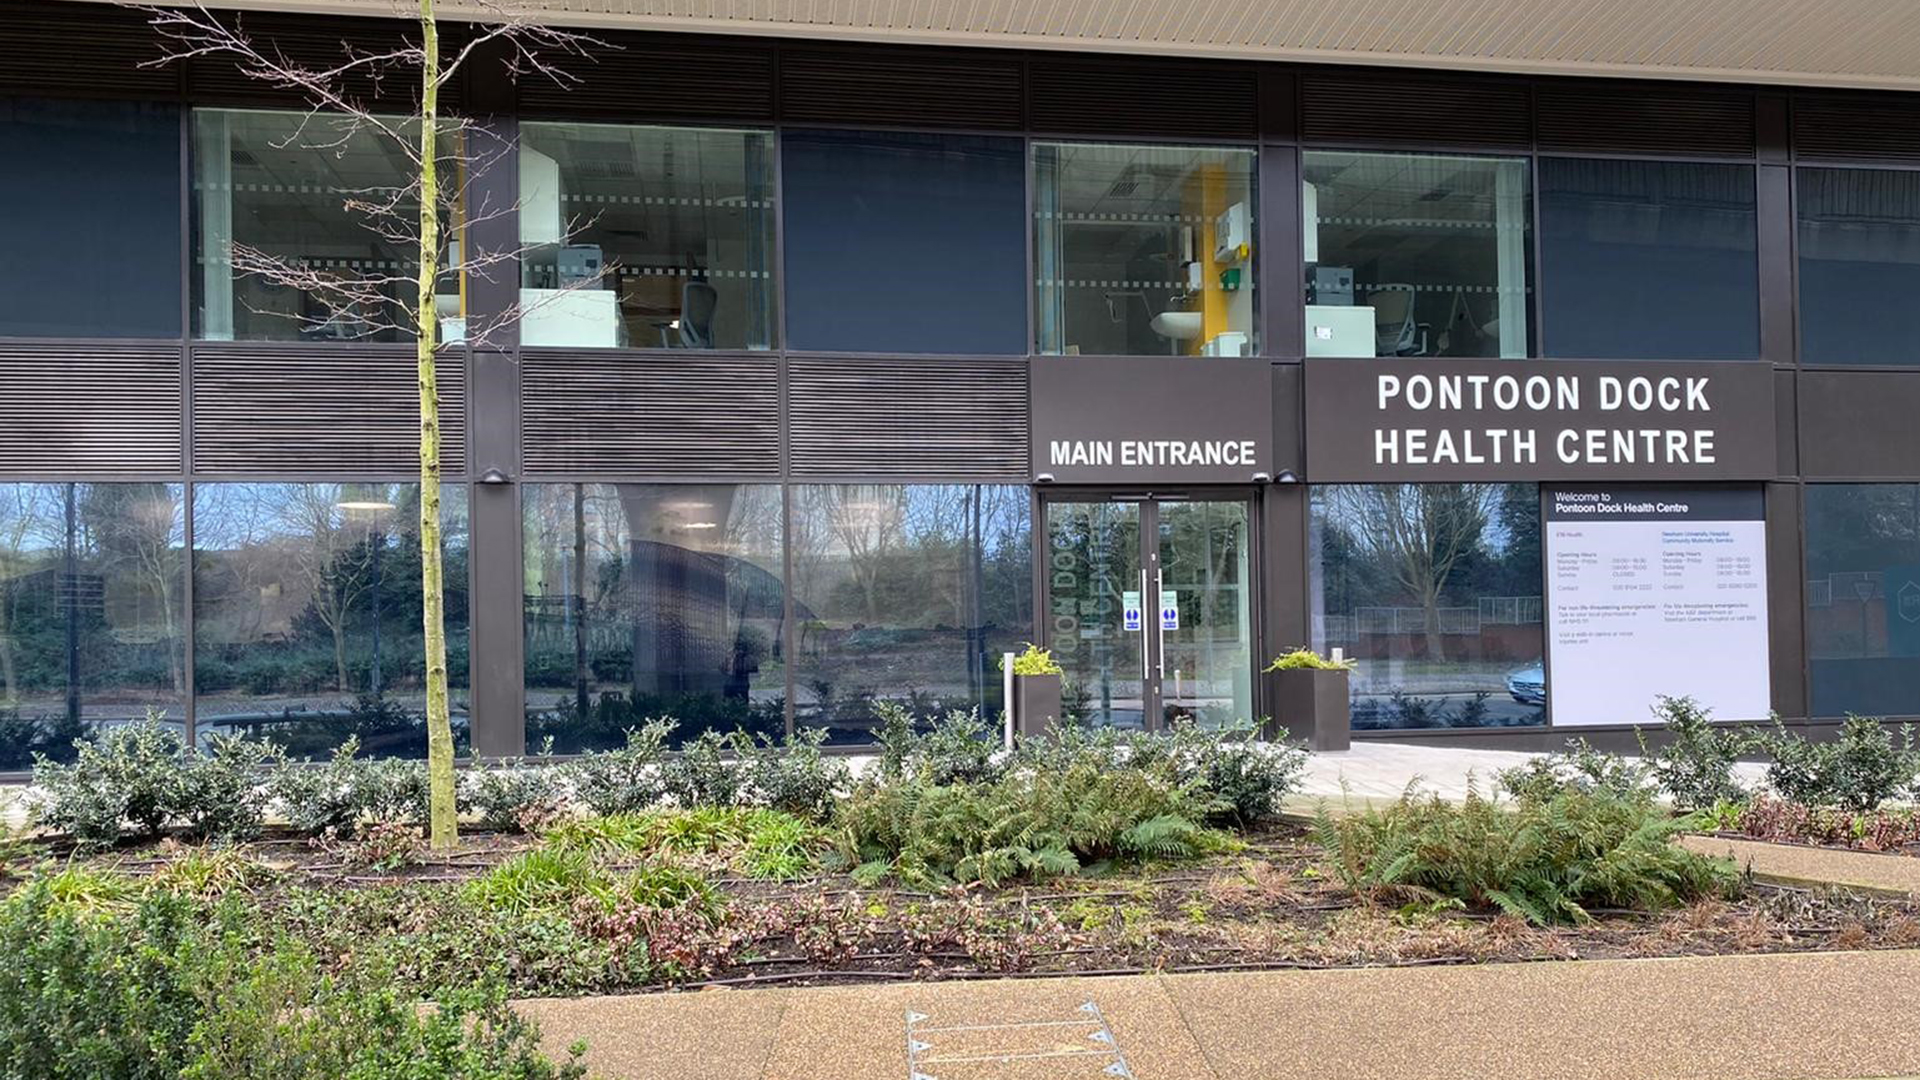 An image showing the main entrance of Pontoon Dock Health Centre